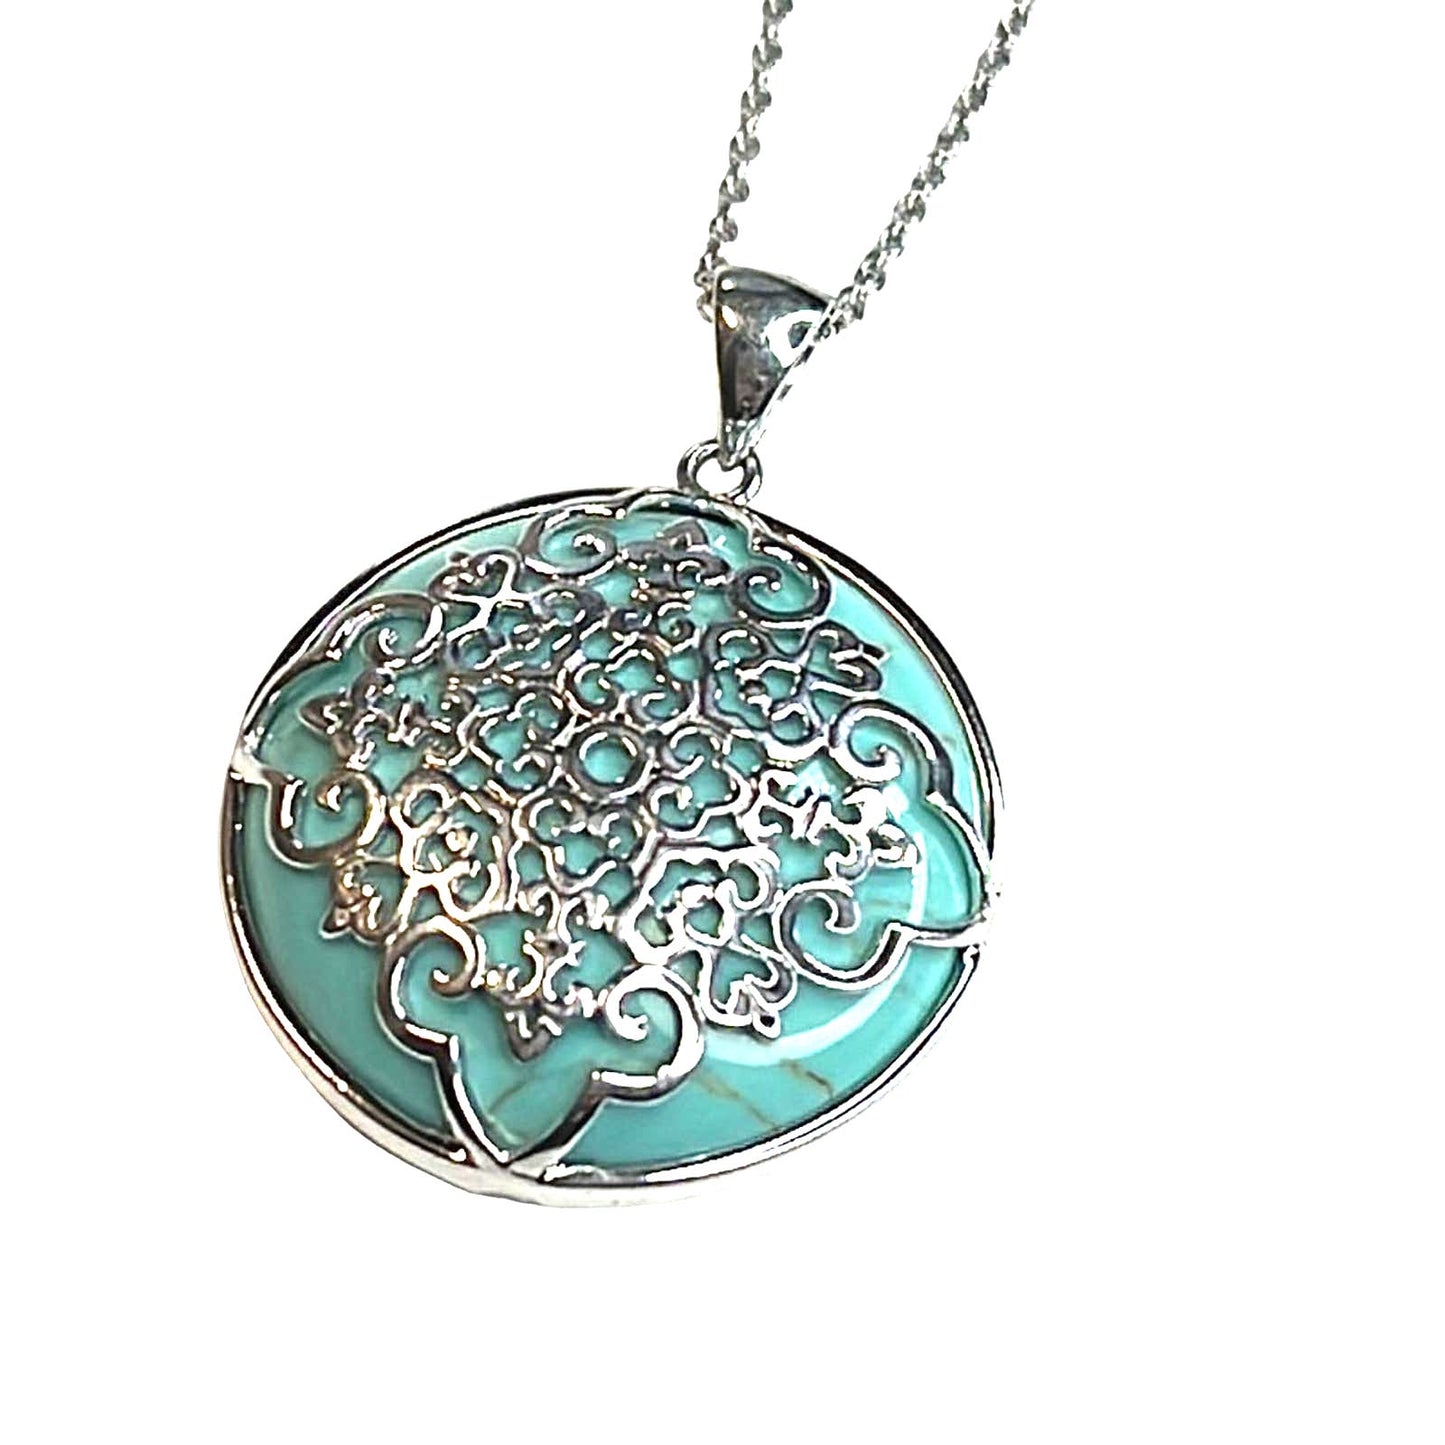 R. H. Macy Silver & Turquoise Filigree Necklace, NWT!